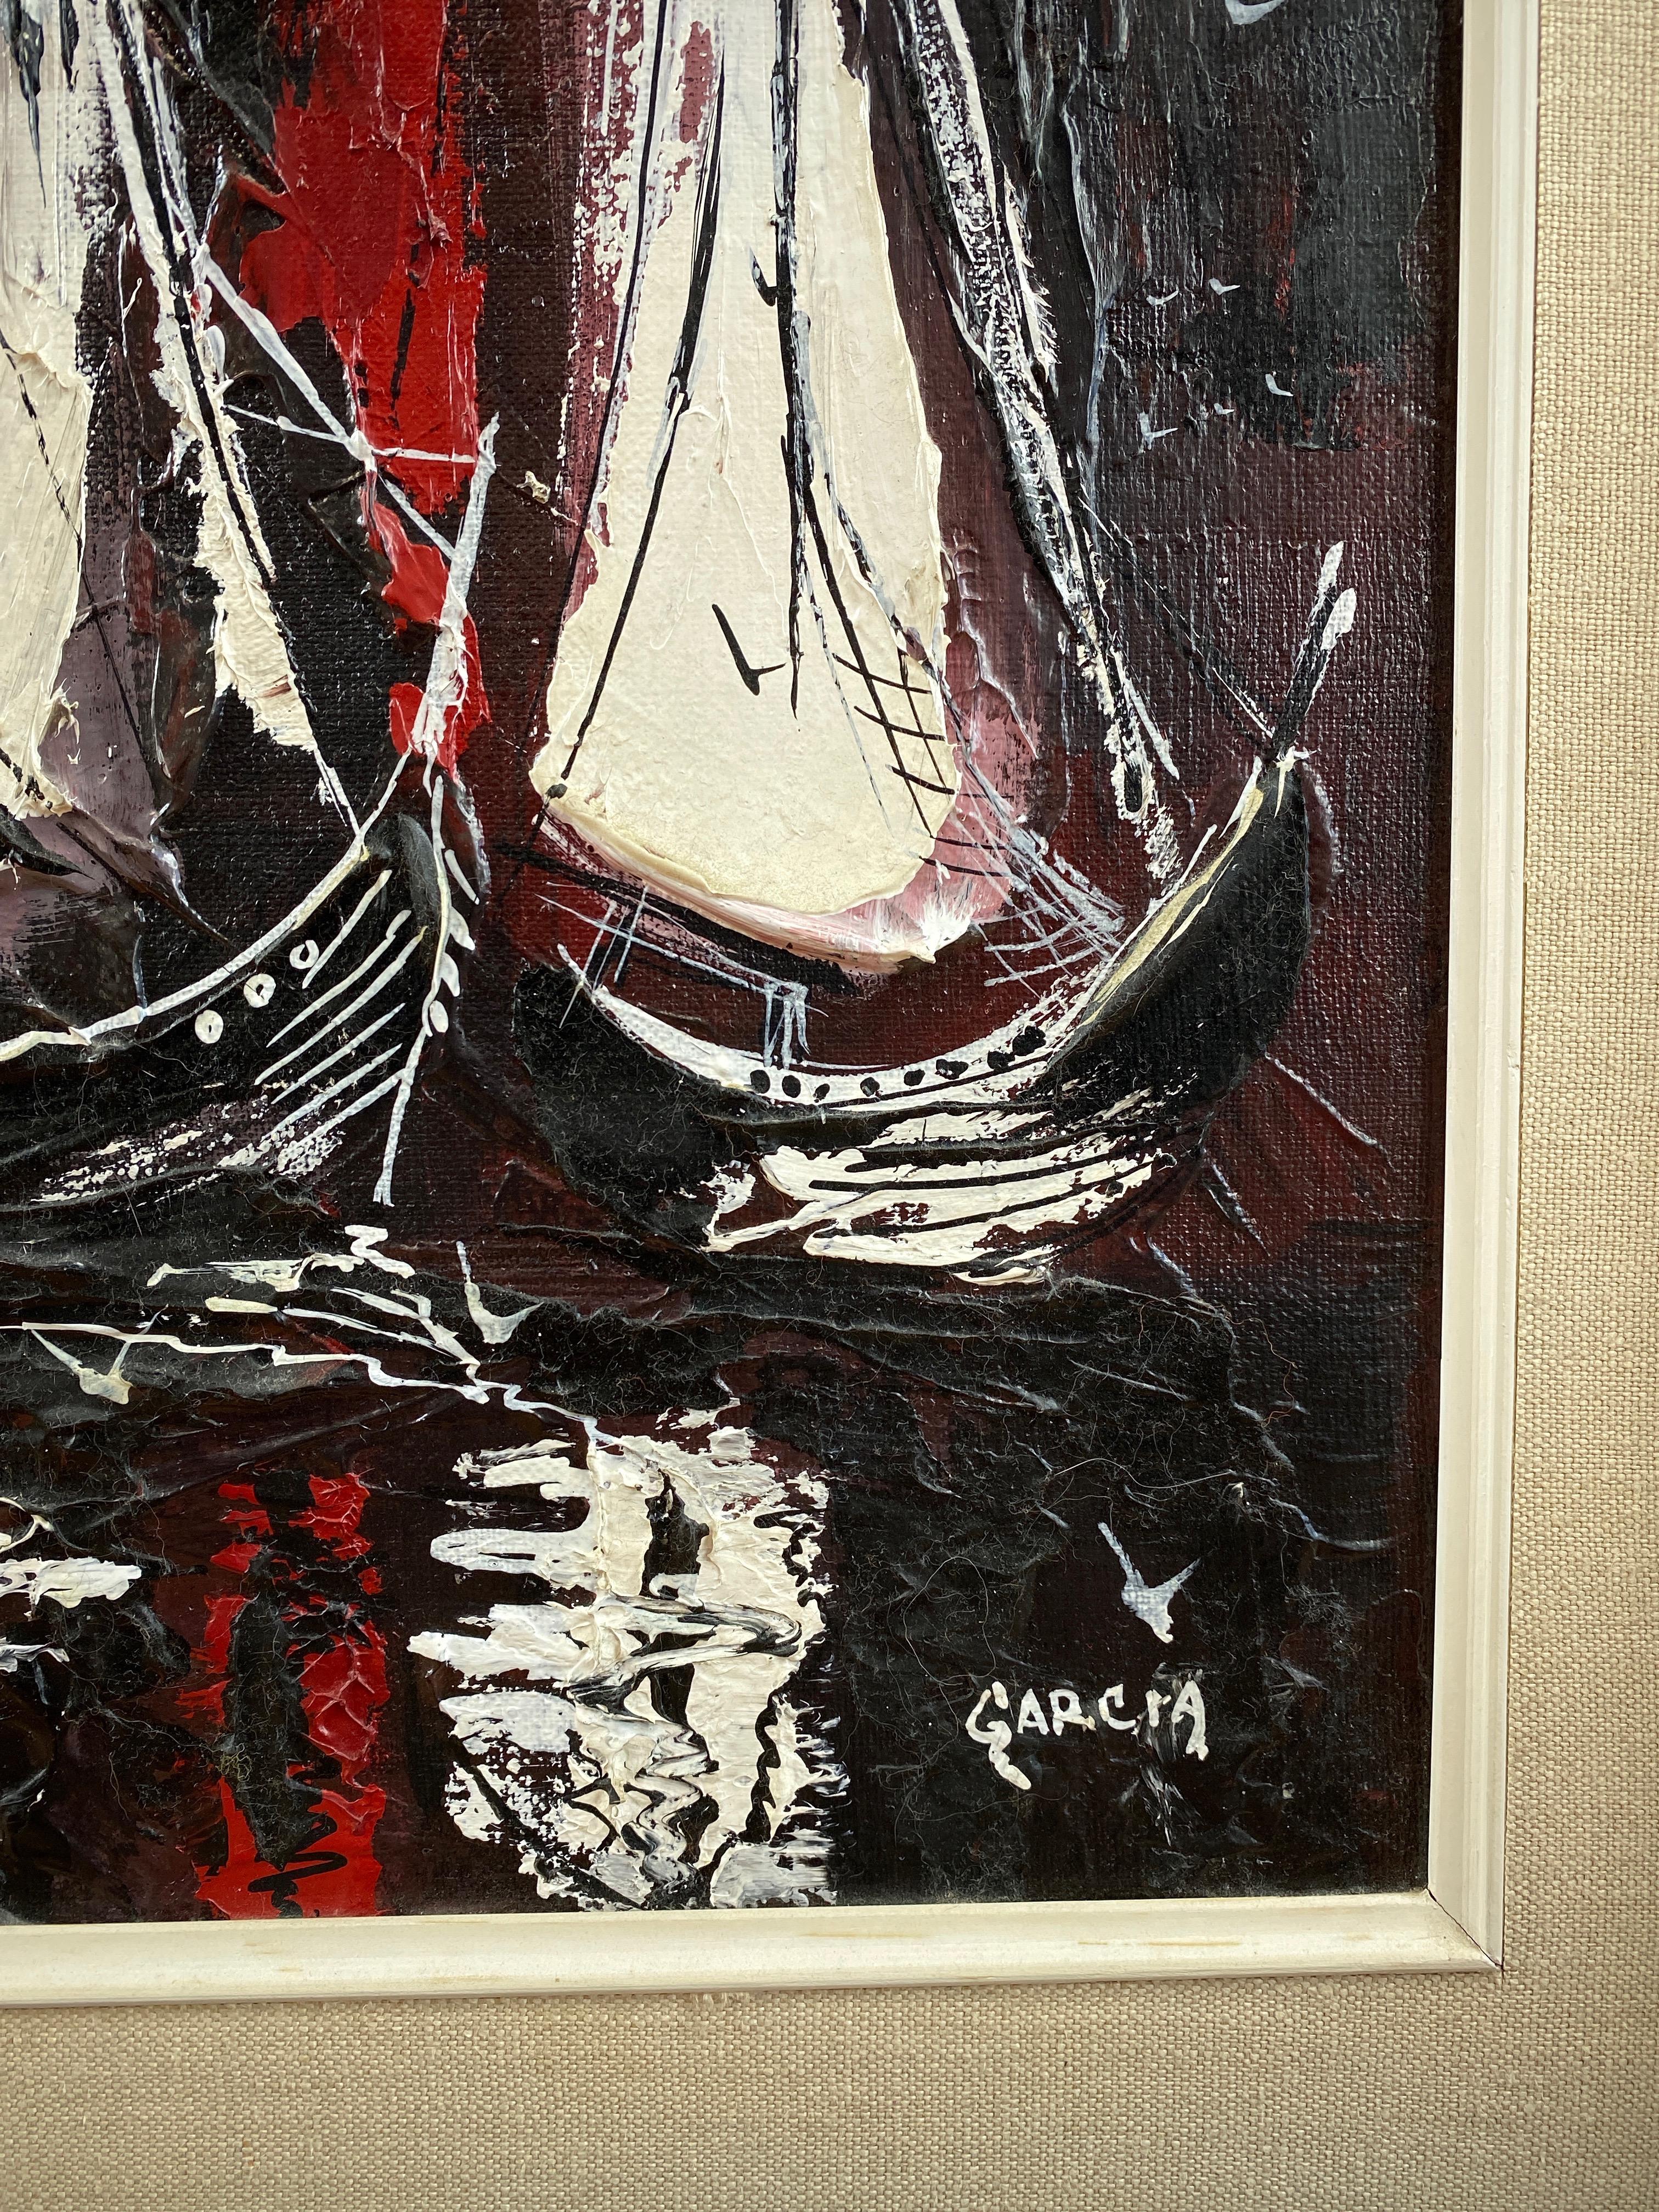 Mid-20th Century Danny Garcia “Moored Sailboats” #2239, Expressionist Mixed-Media Painting, 1968 For Sale